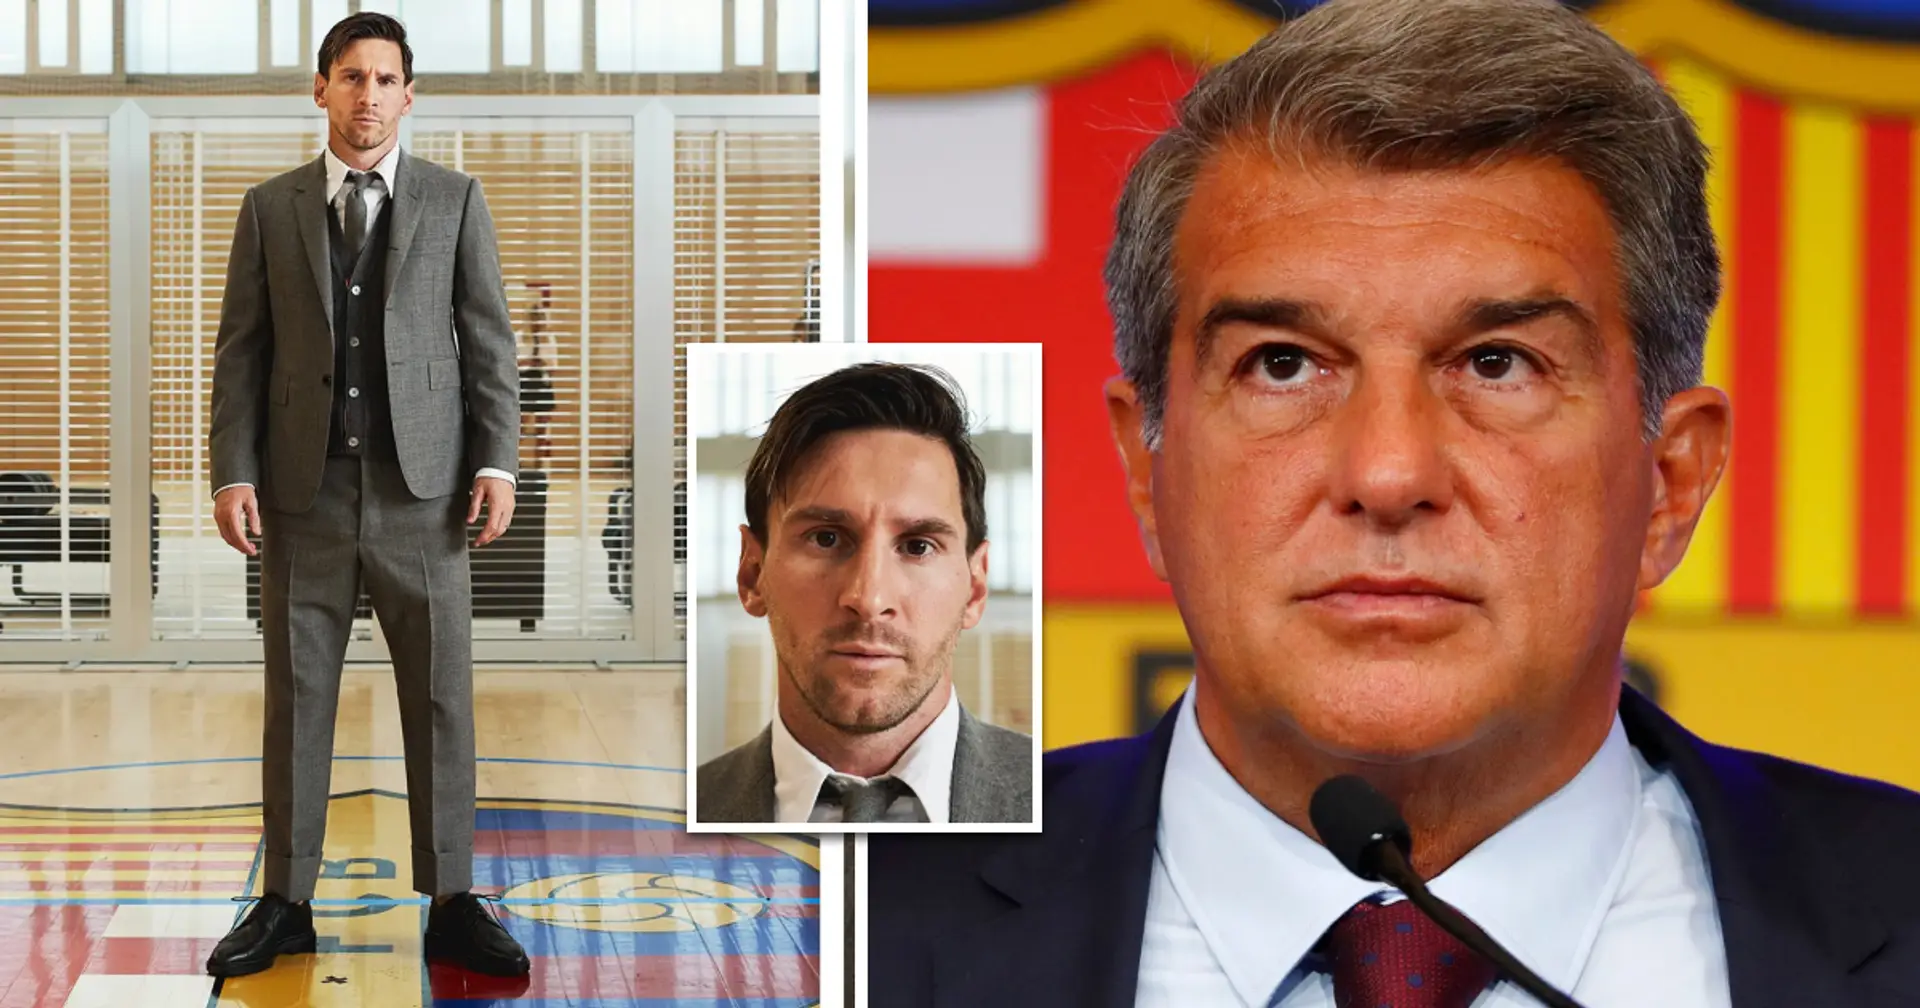 4 reasons why Messi could be better Barca president than Laporta